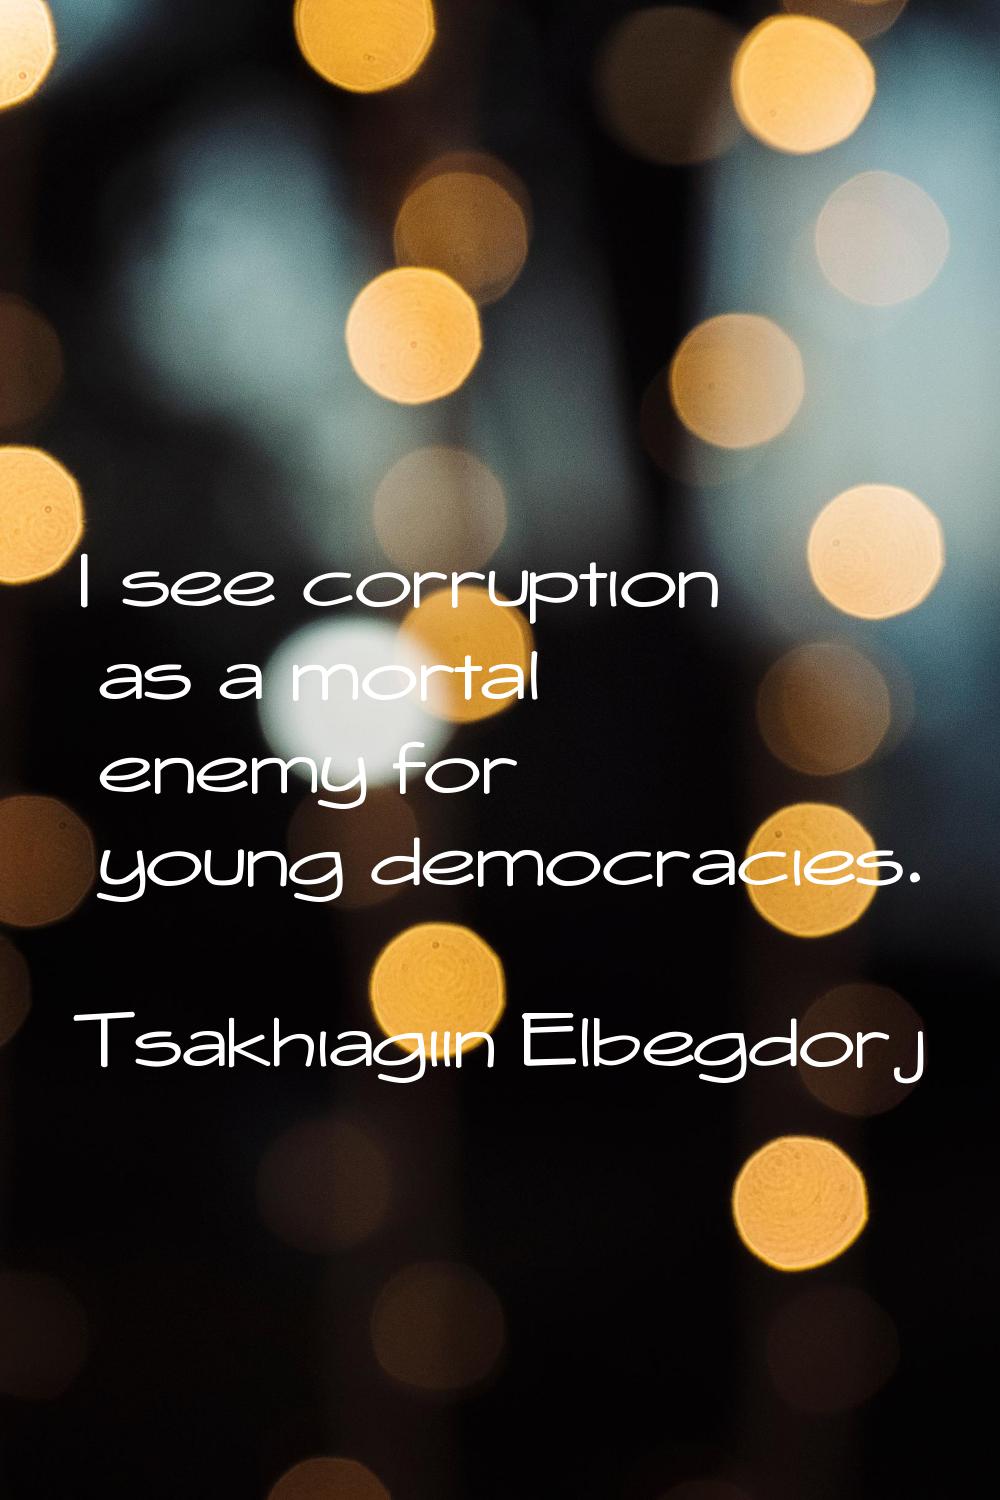 I see corruption as a mortal enemy for young democracies.